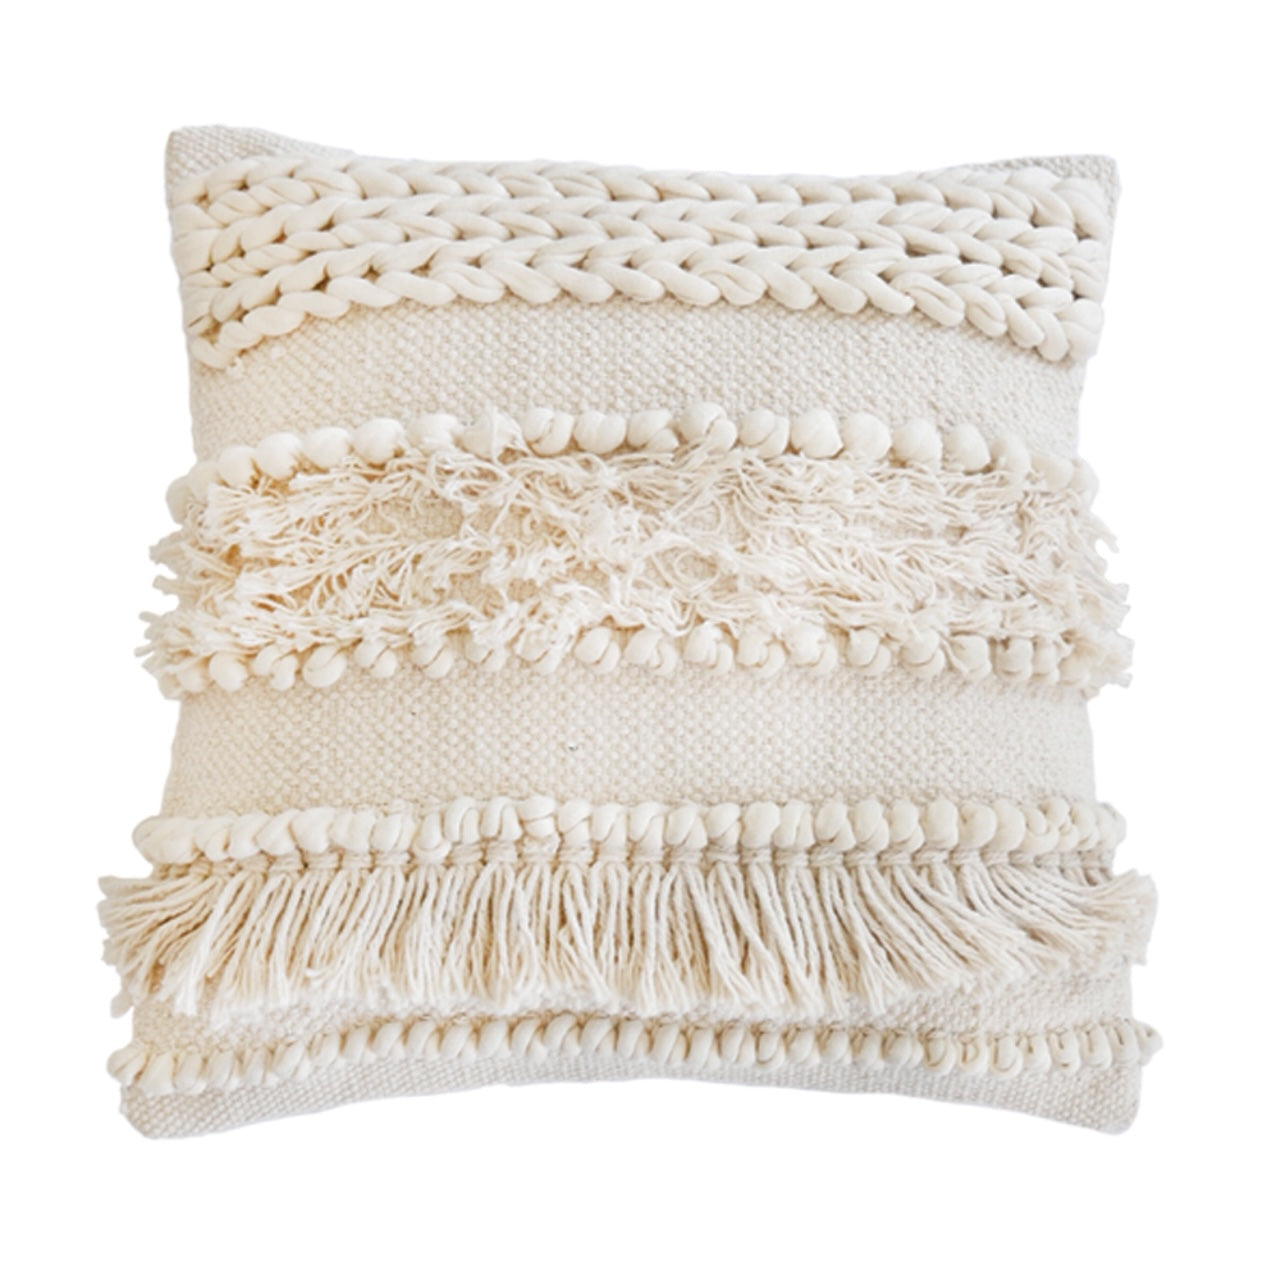 POM POM IMAN HAND WOVEN PILLOW 20" X 20" WITH INSERT